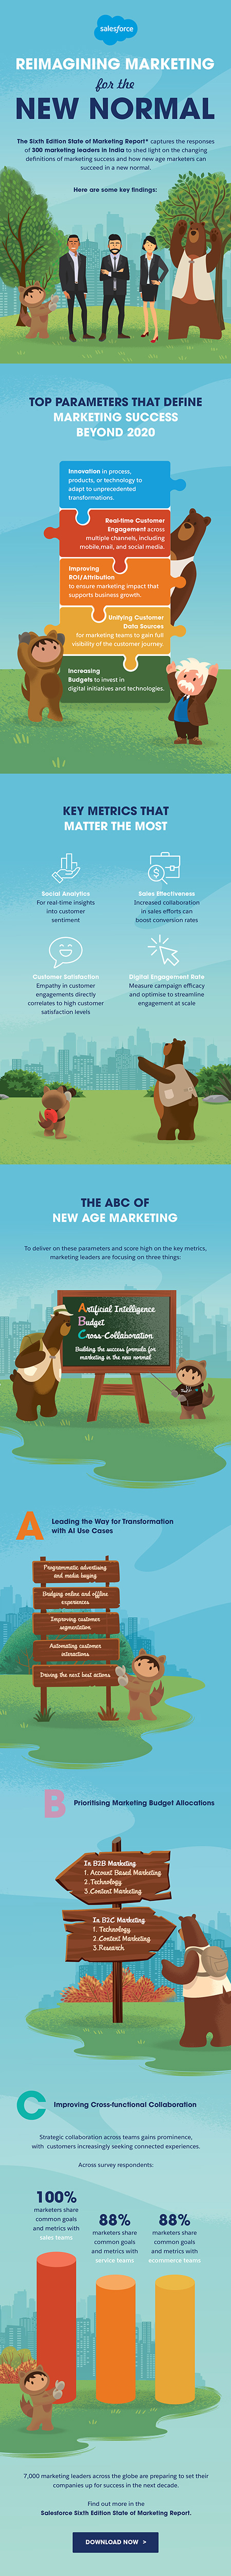 Reimagining Marketing for the New Normal